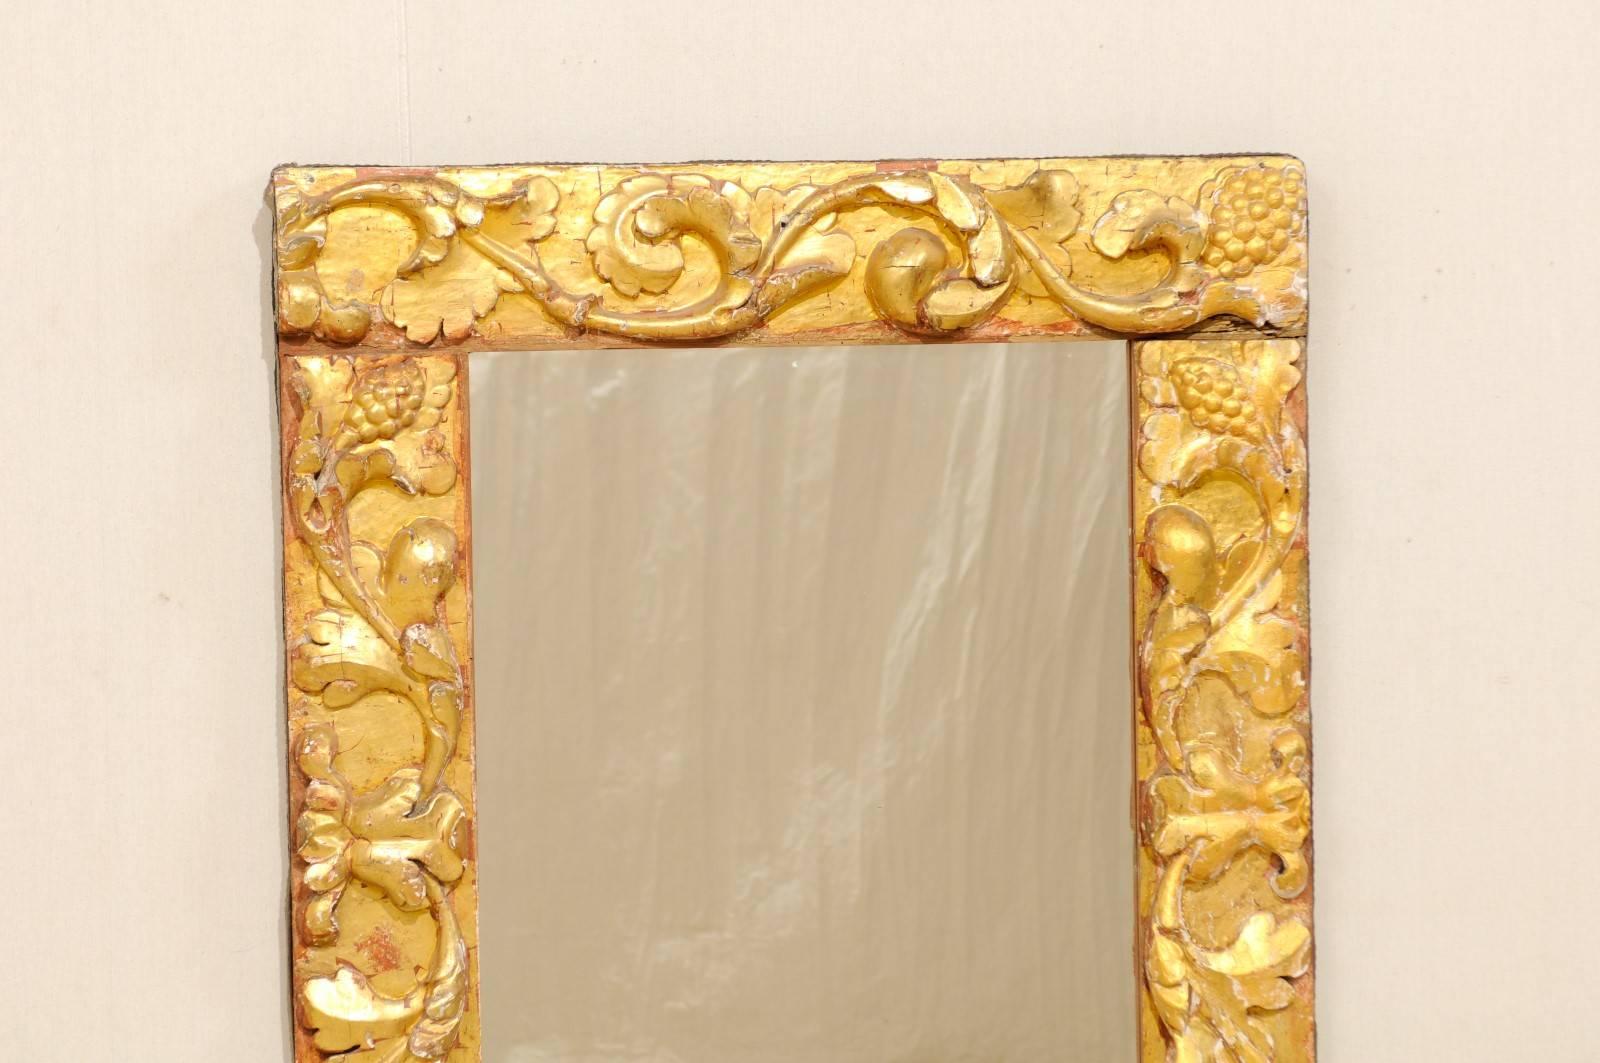 Exquisite Italian Giltwood Carved Mirror of 19th Century Italian Fragments In Good Condition For Sale In Atlanta, GA